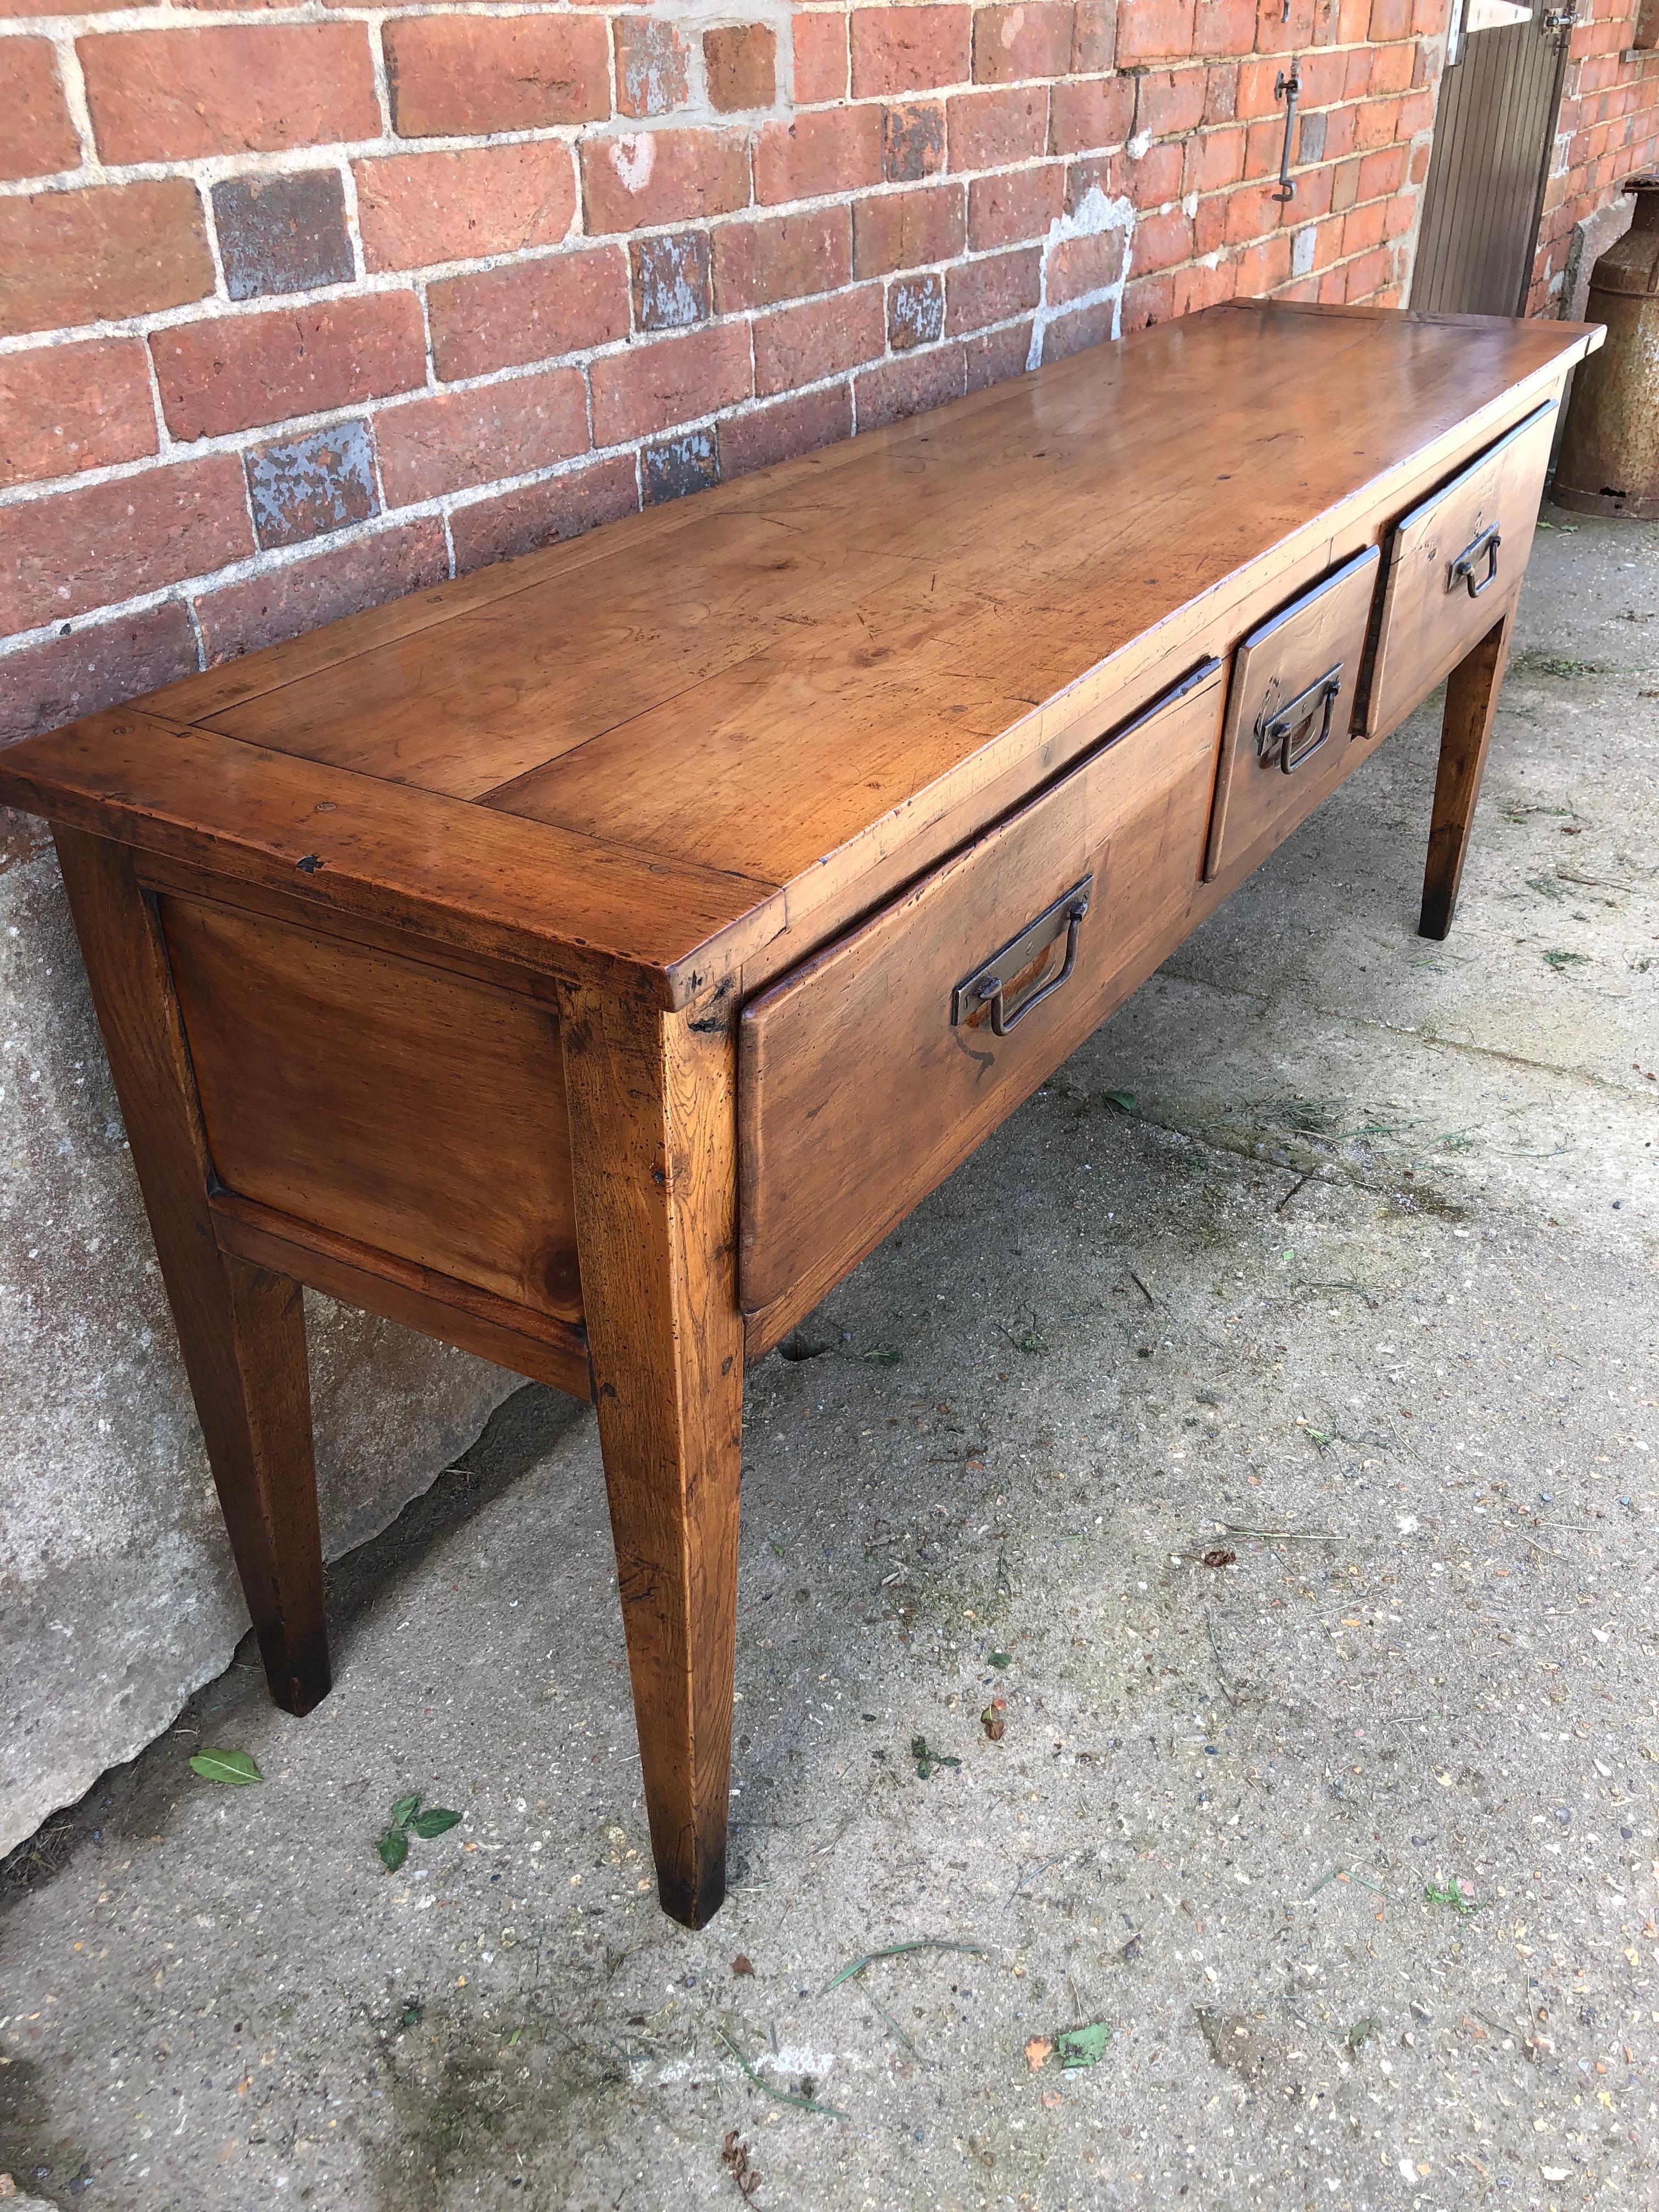 Very handsome 19th century three-drawer cherrywood server with original ironwork handles. This Item has been restored, re-polished and given a practical, hard wearing finish by one of the UK's top furniture conservators.